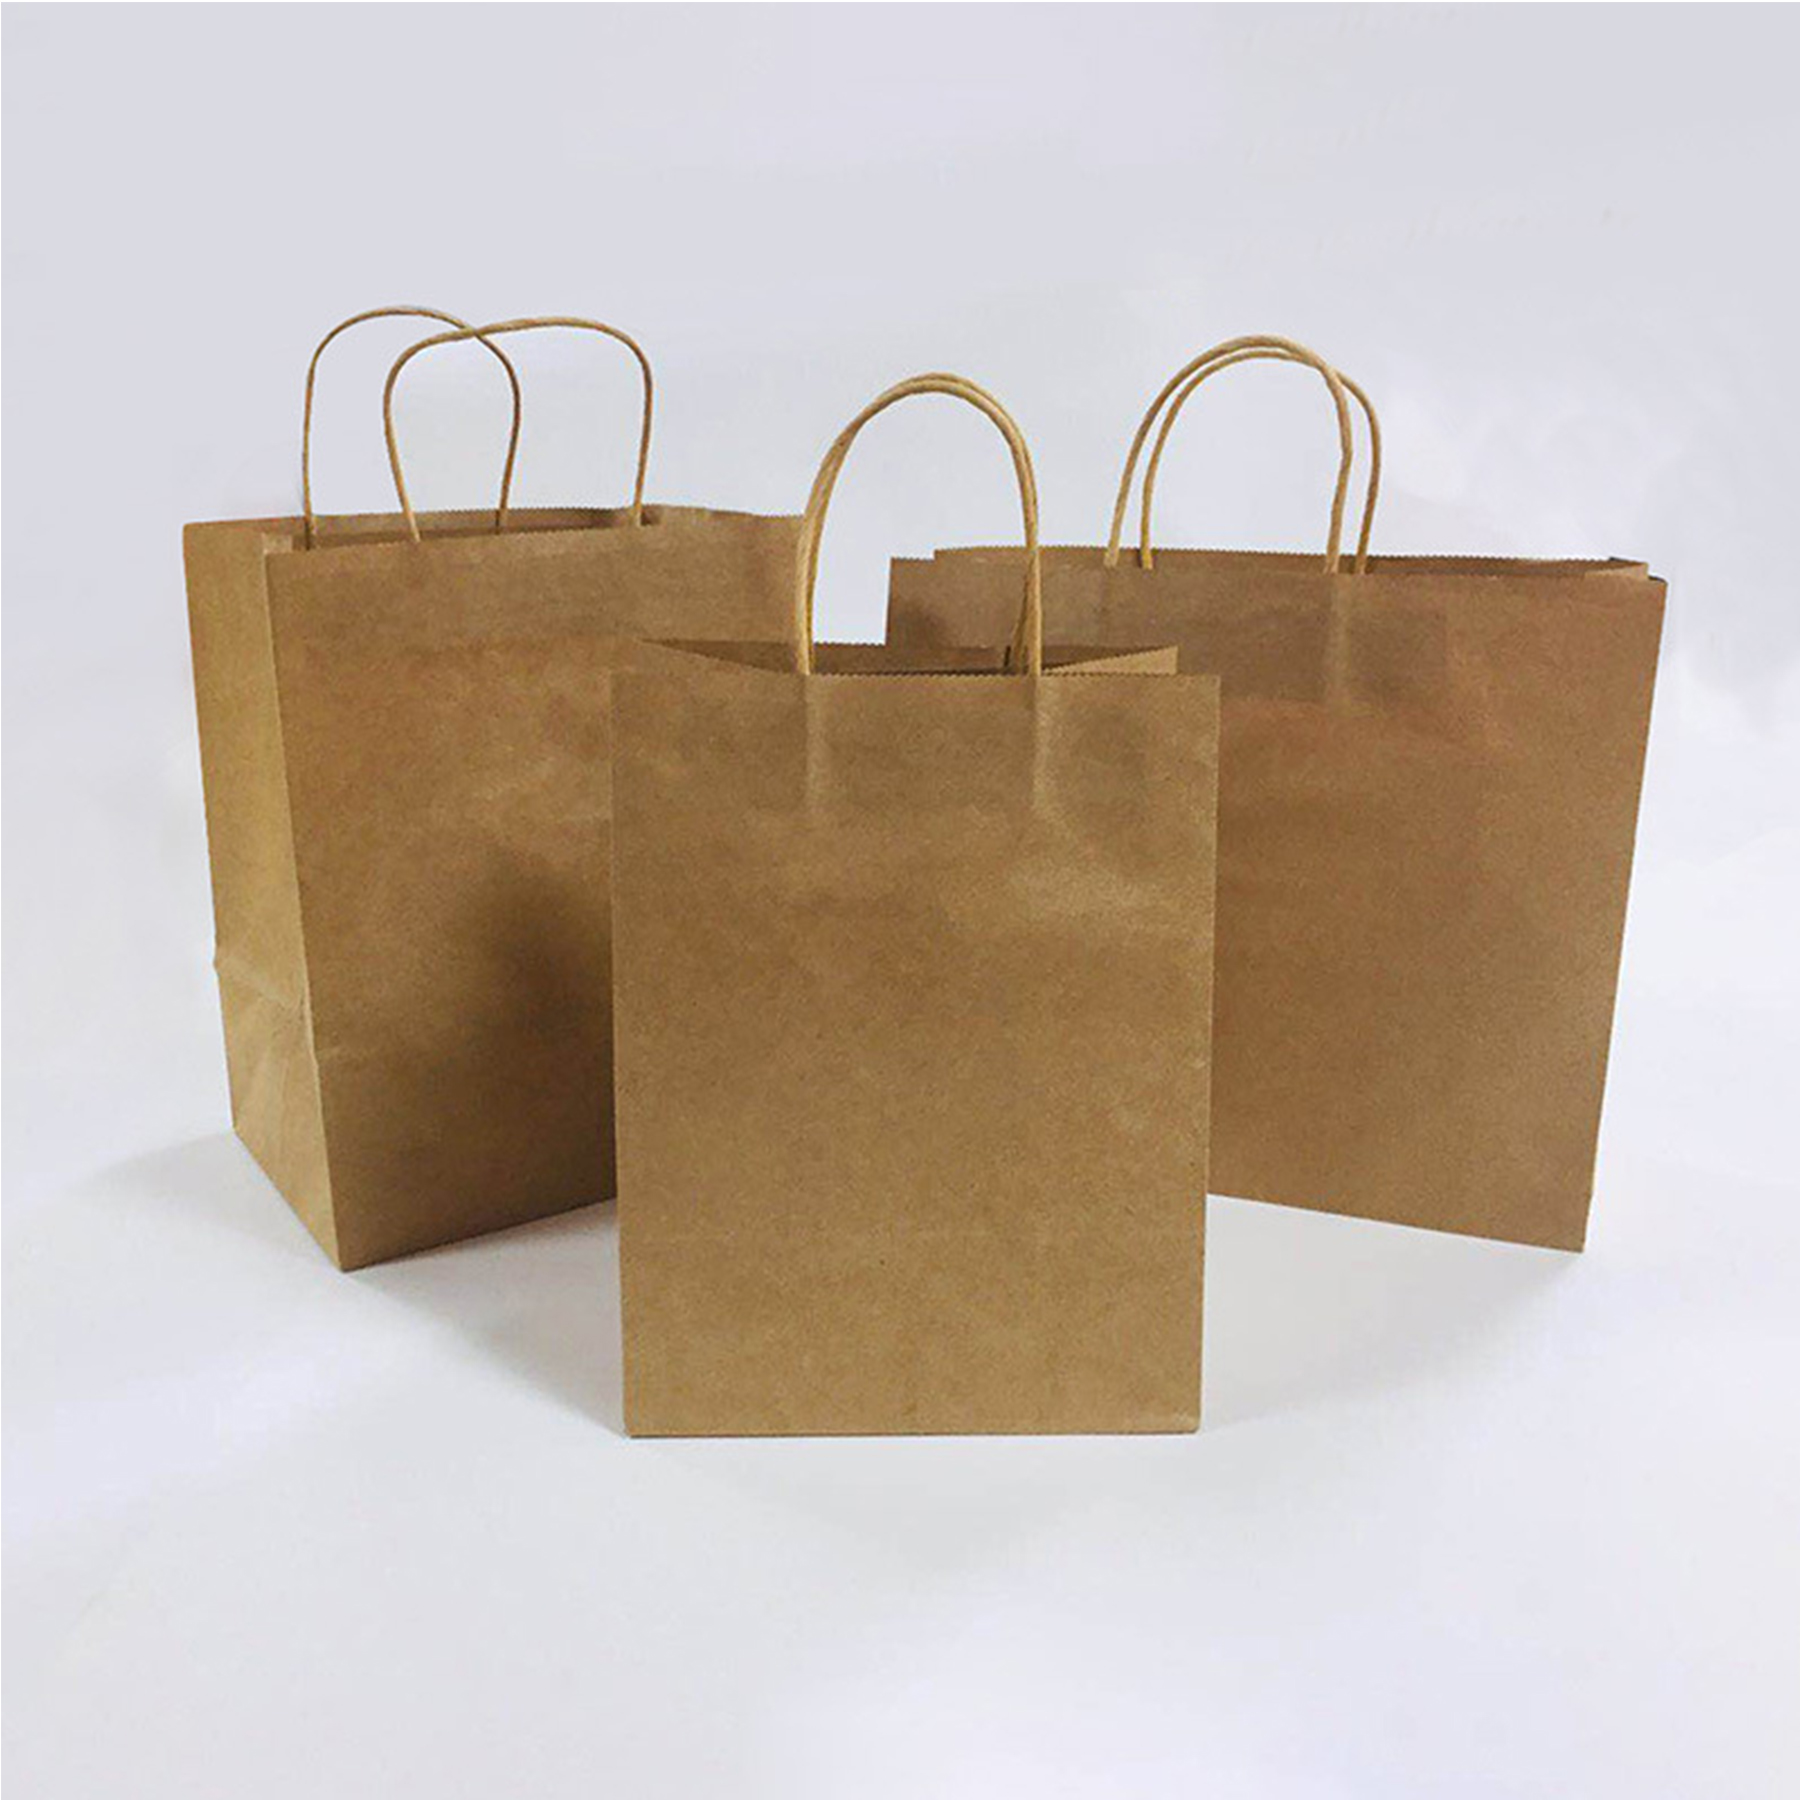  Gift Bags Brown Paper Gift Bags with Handles 